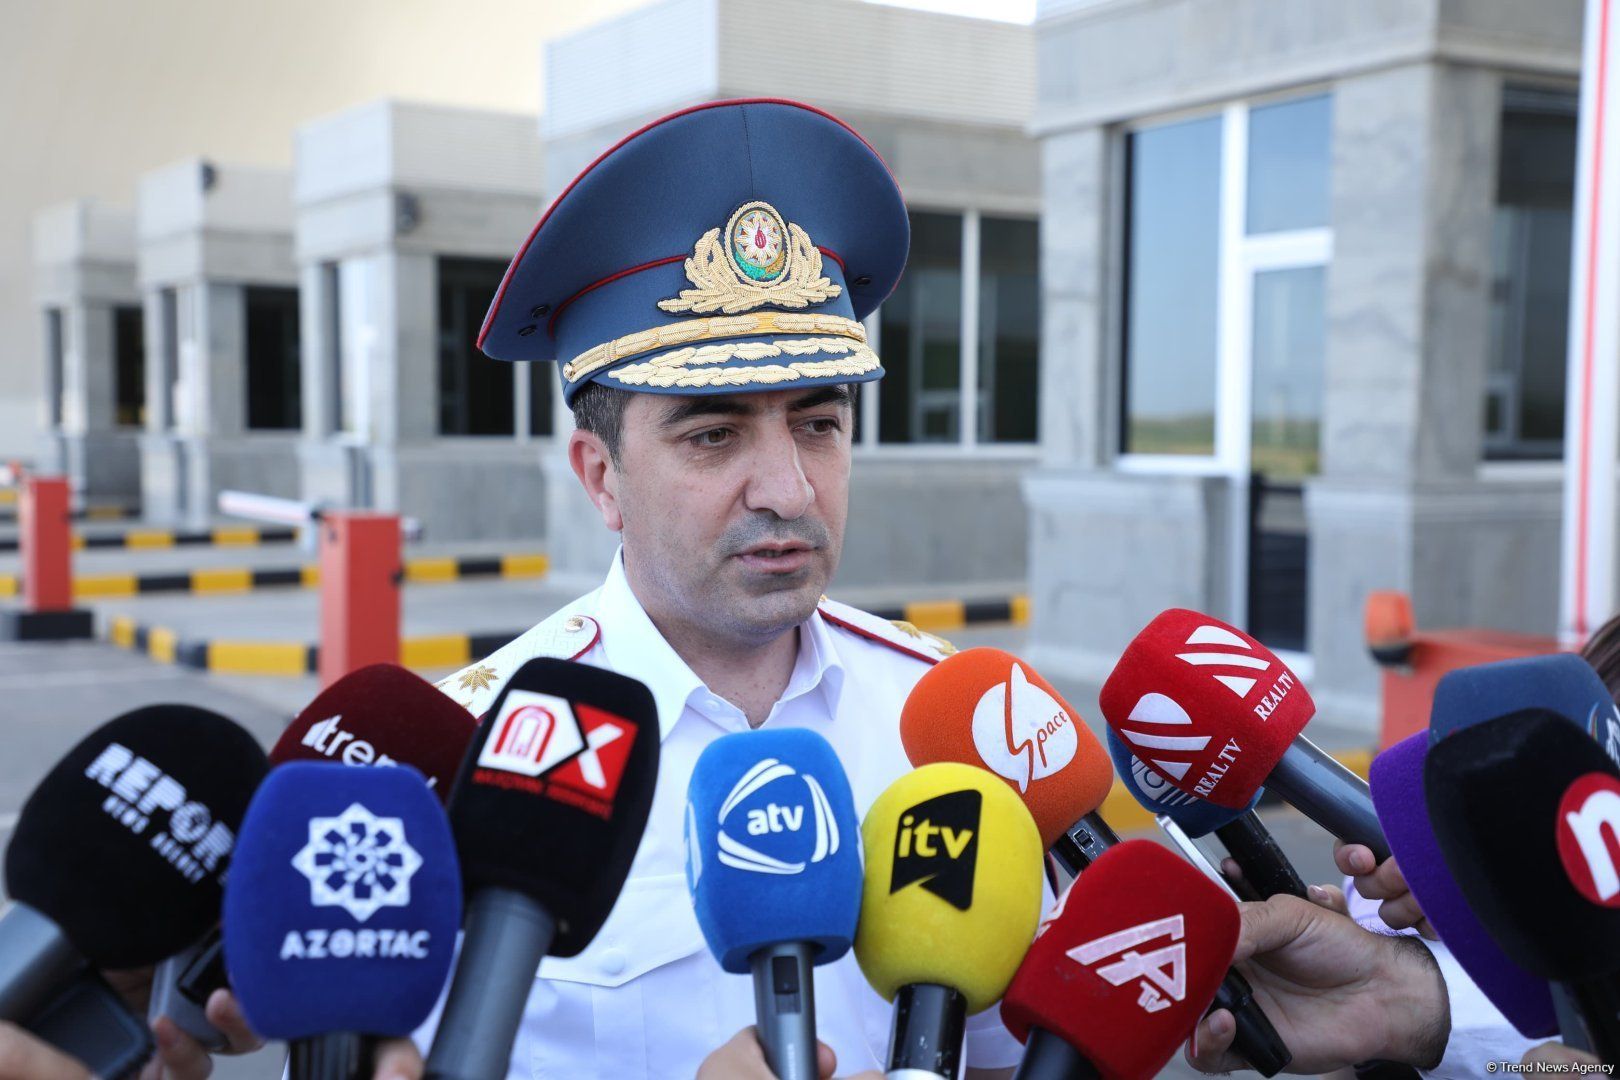 Azerbaijan discloses its only accessible land border crossing location